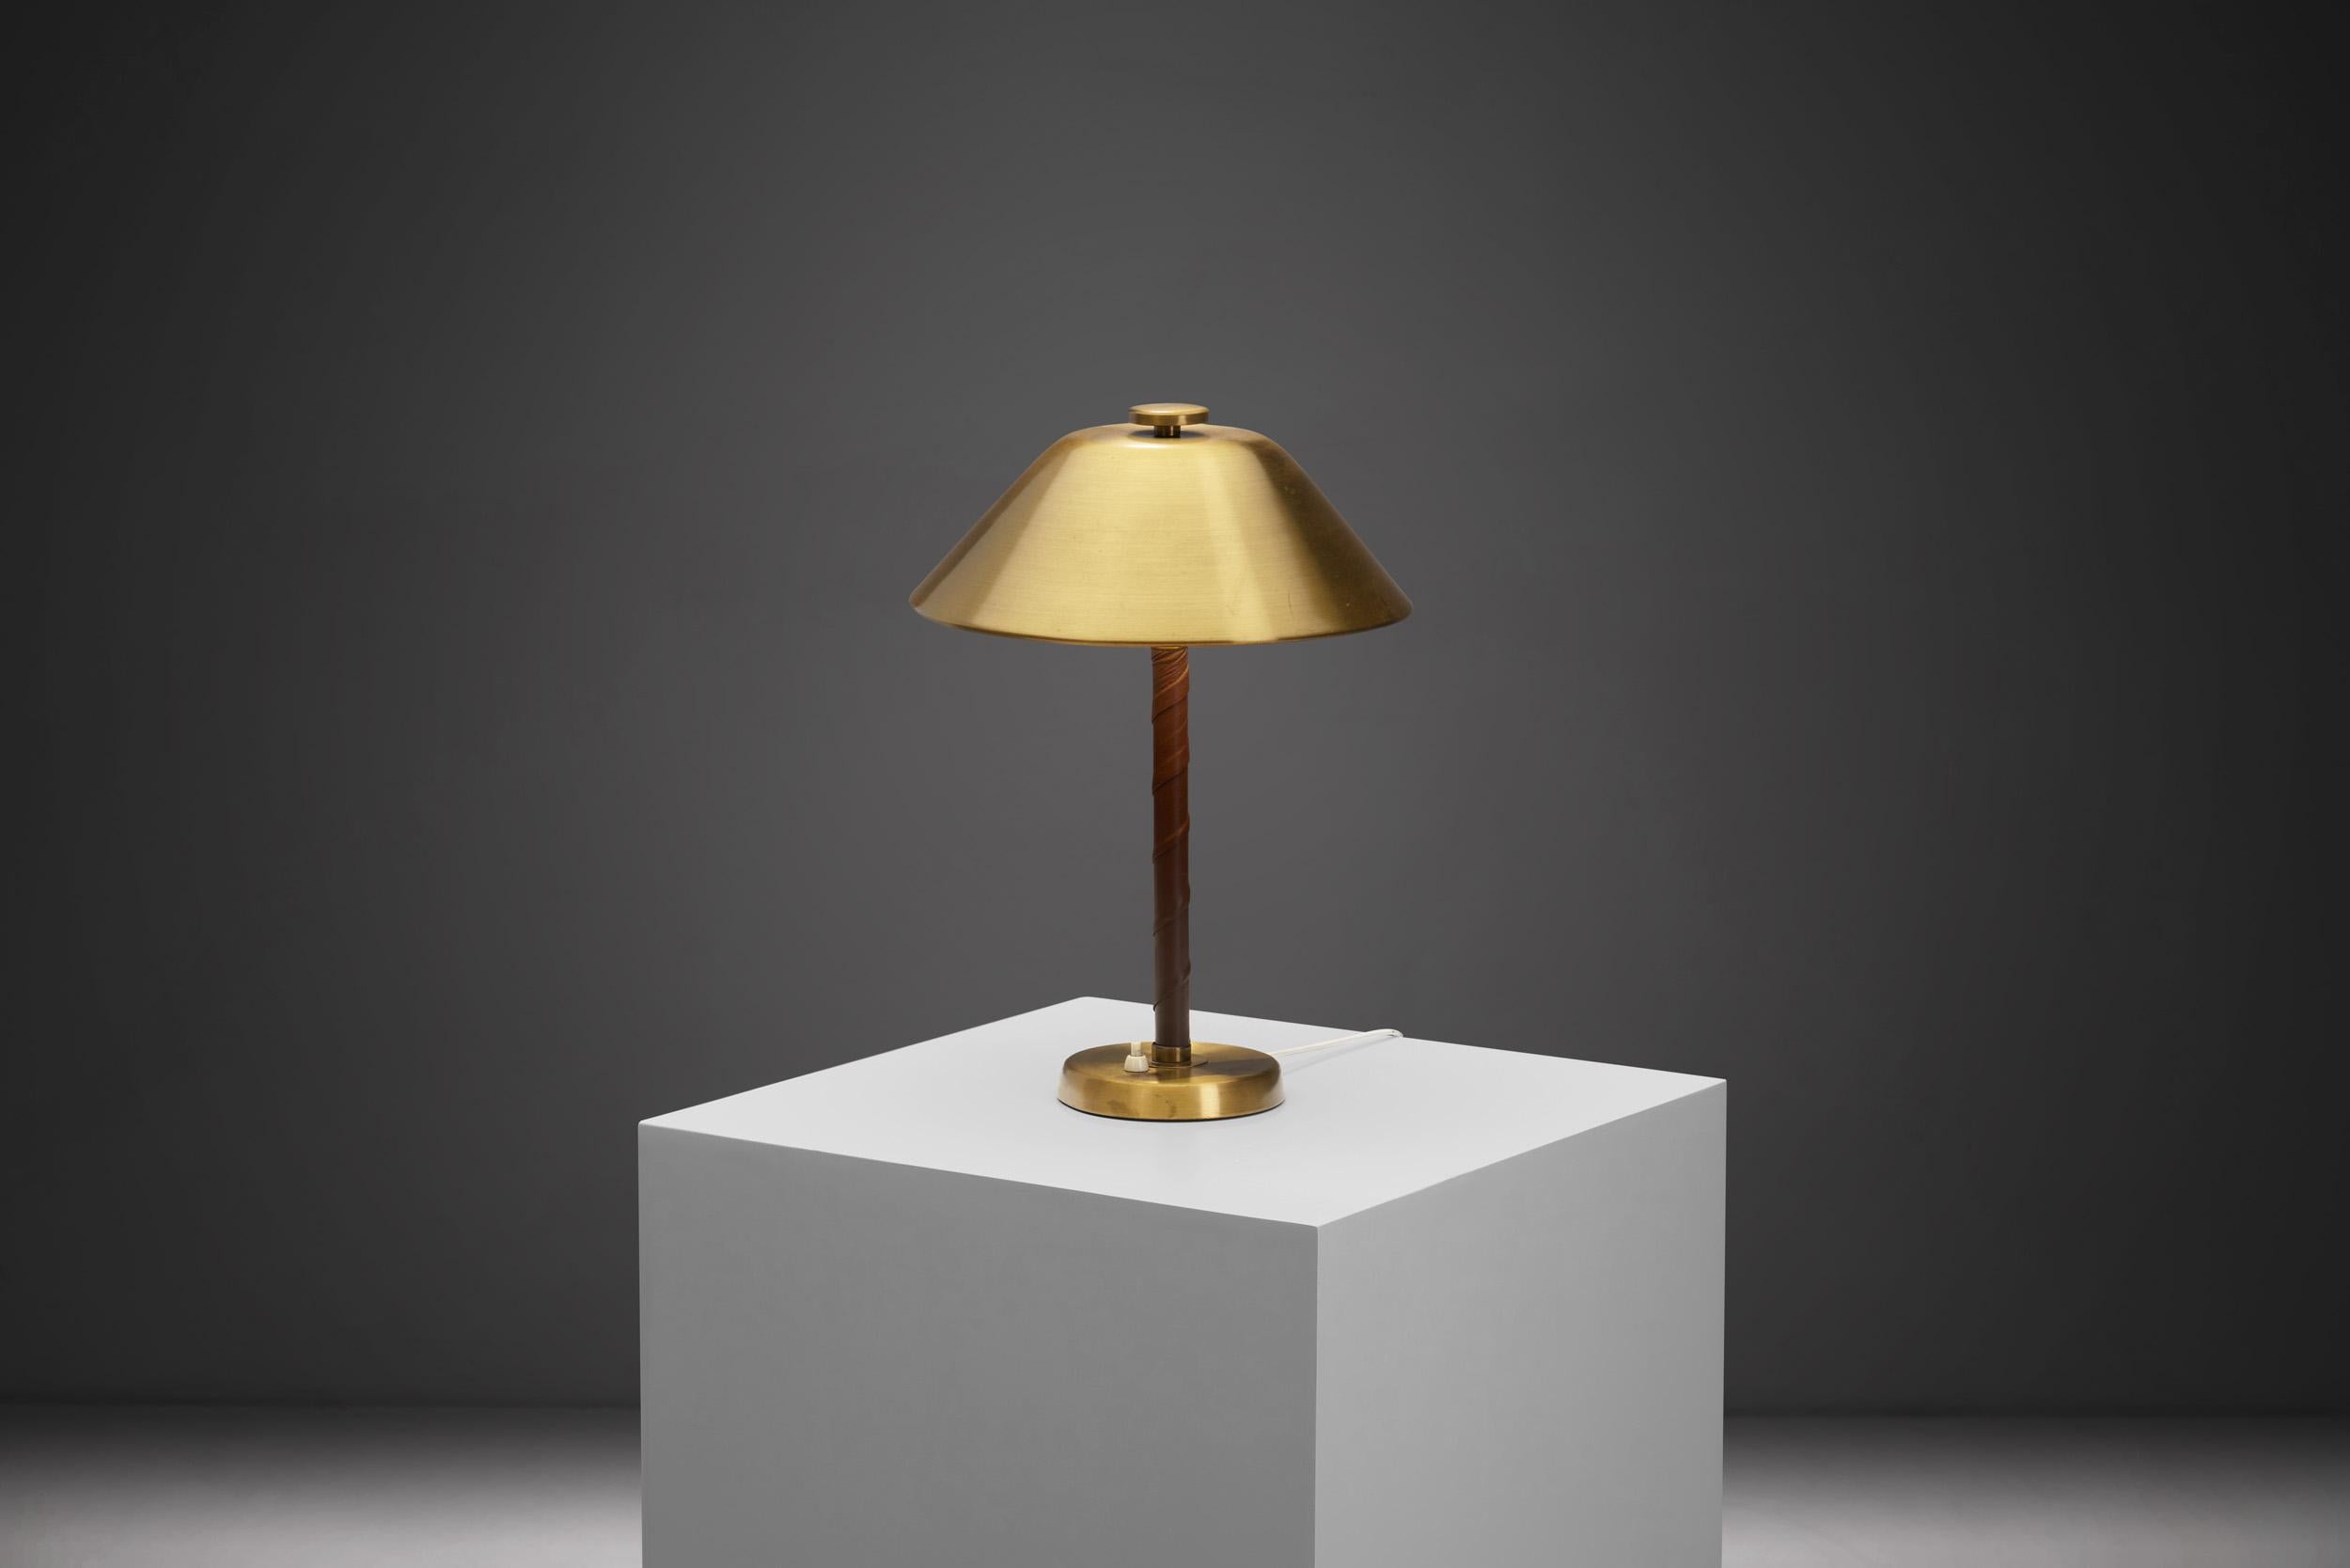 This stylish table lamp is a delightfully distinctive model, with immediately recognizable details and material choices. According to the Museum of Malmö, Einar Bäckström founded his workshop in 1918 for the manufacture of lighting and ornaments,